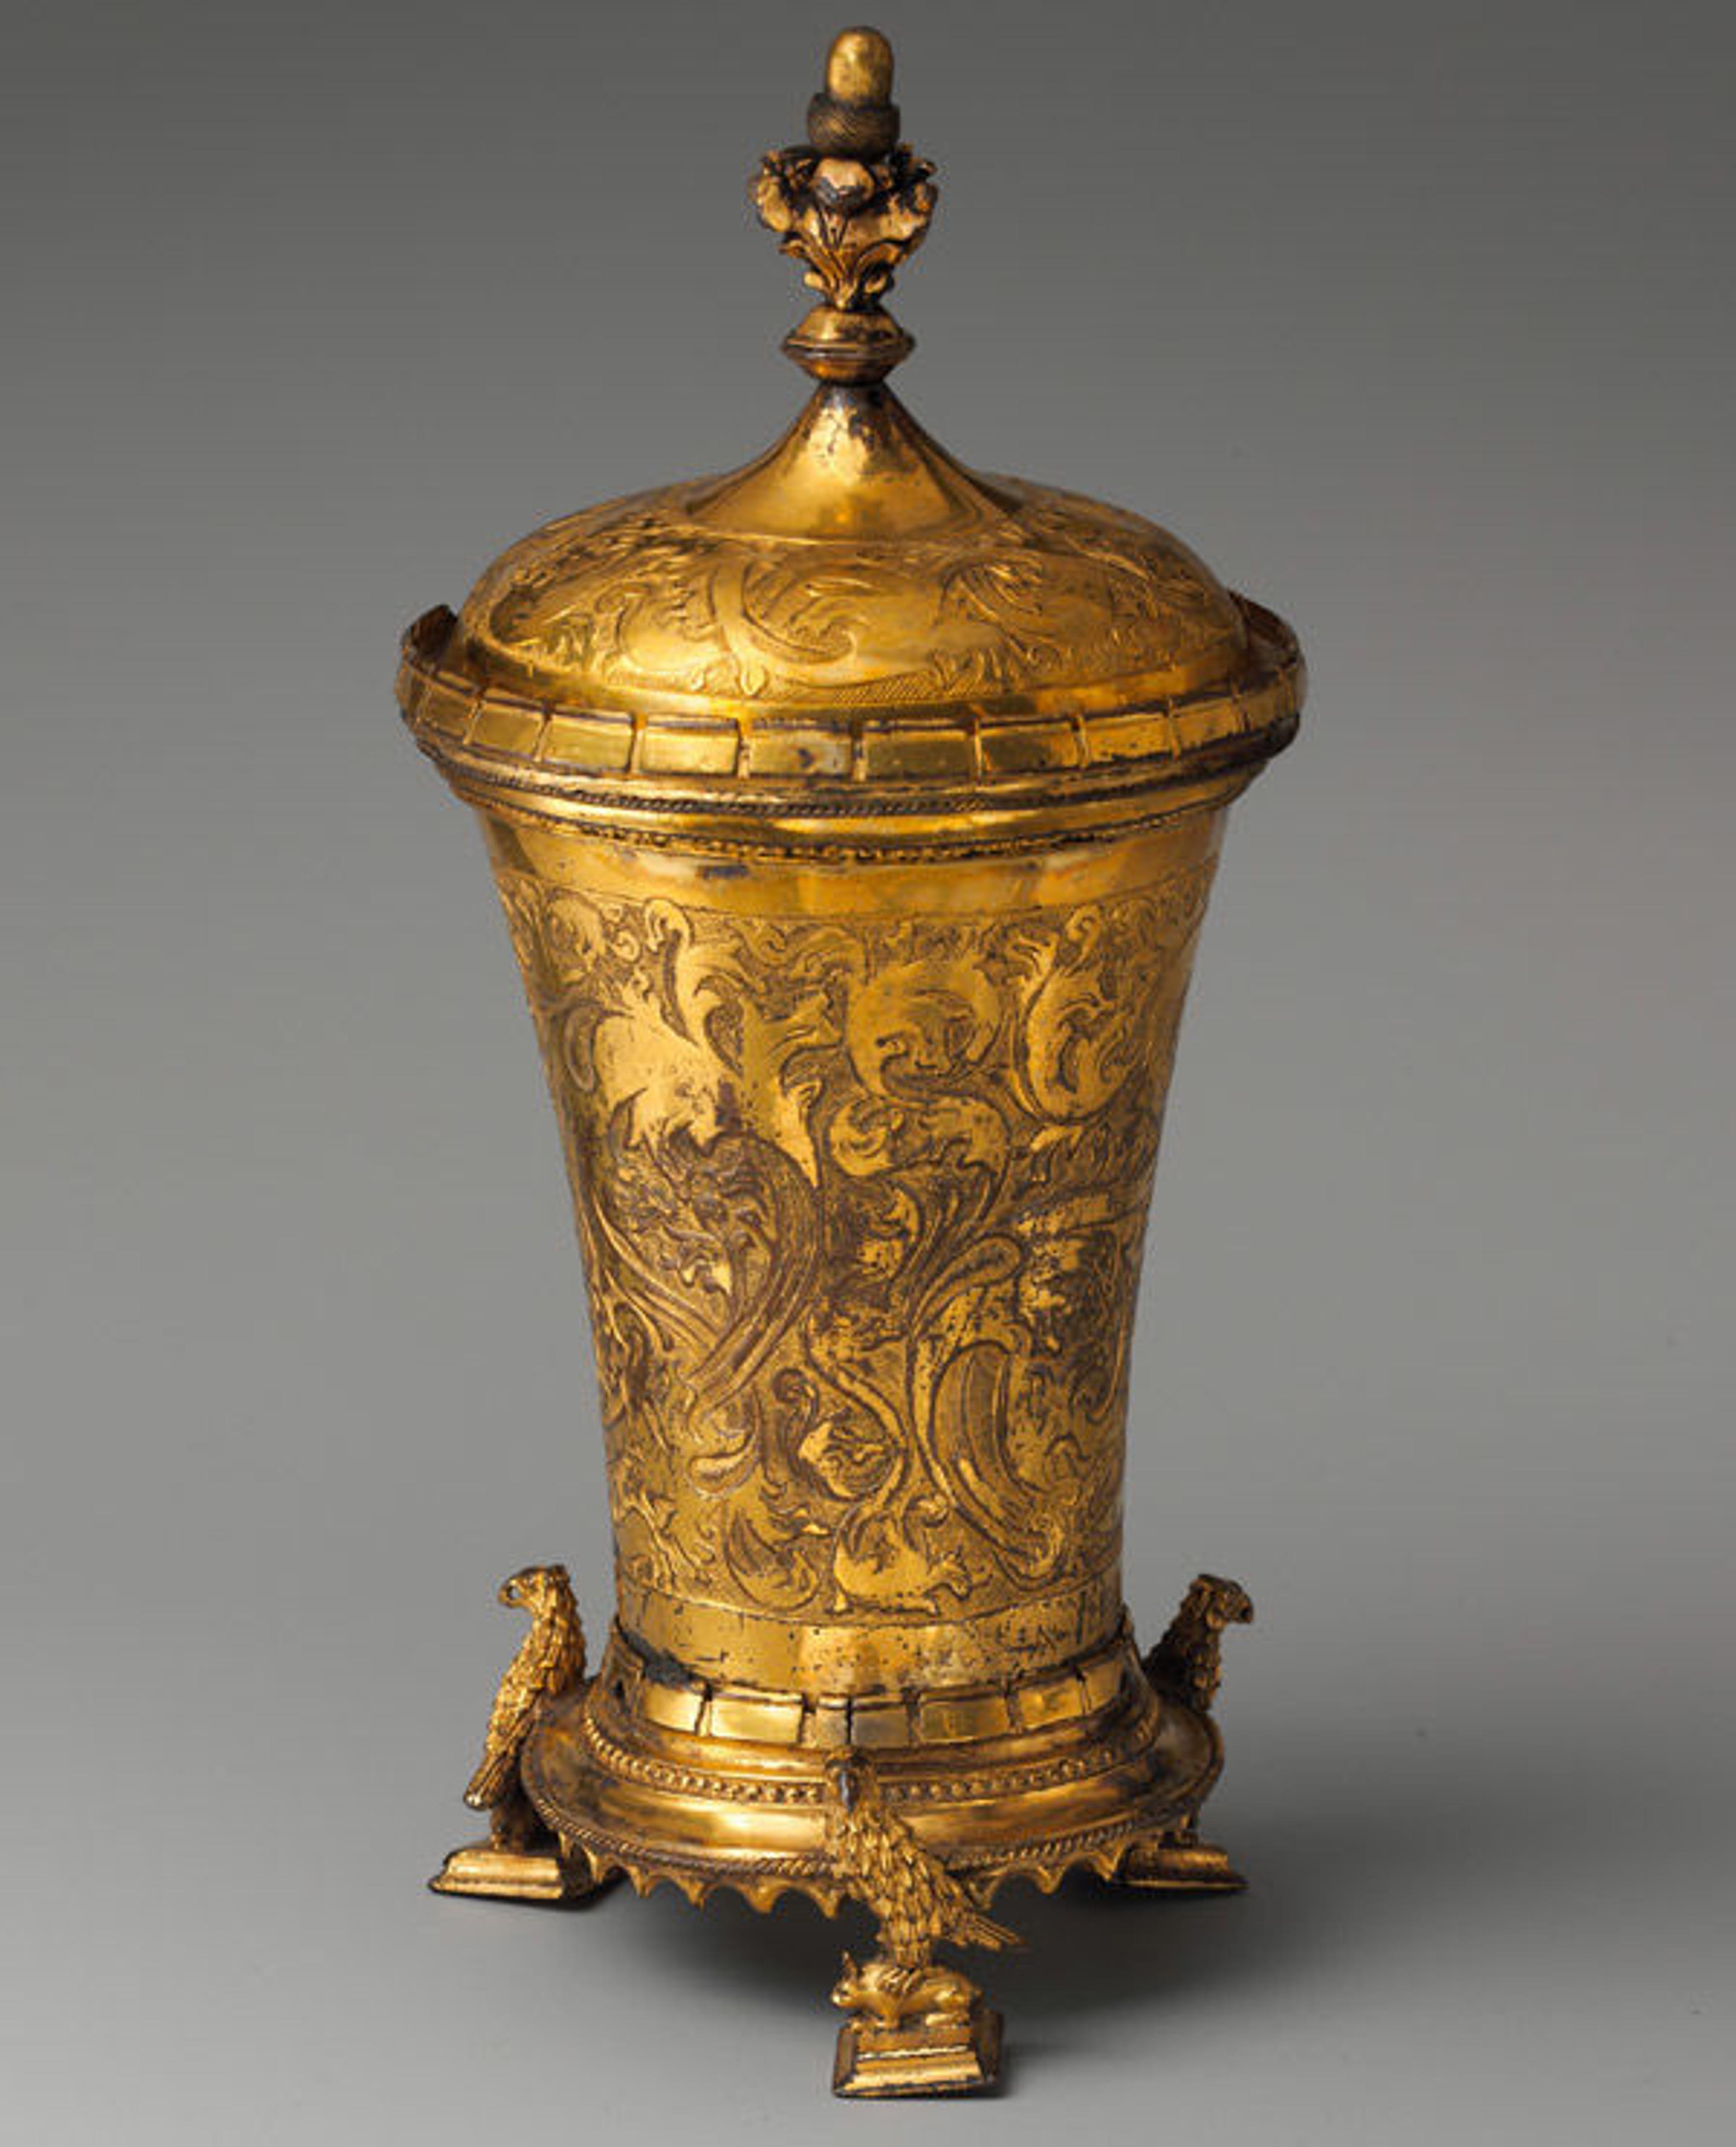 Covered beaker, ca. 1490–1500. Made in Nuremberg, Germany. German. Copper gilt; Overall: 9 1/16 x 3 3/4 in. (23 x 9.5 cm). The Metropolitan Museum of Art, New York, The Cloisters Collection, 1994 (1994.270a, b)